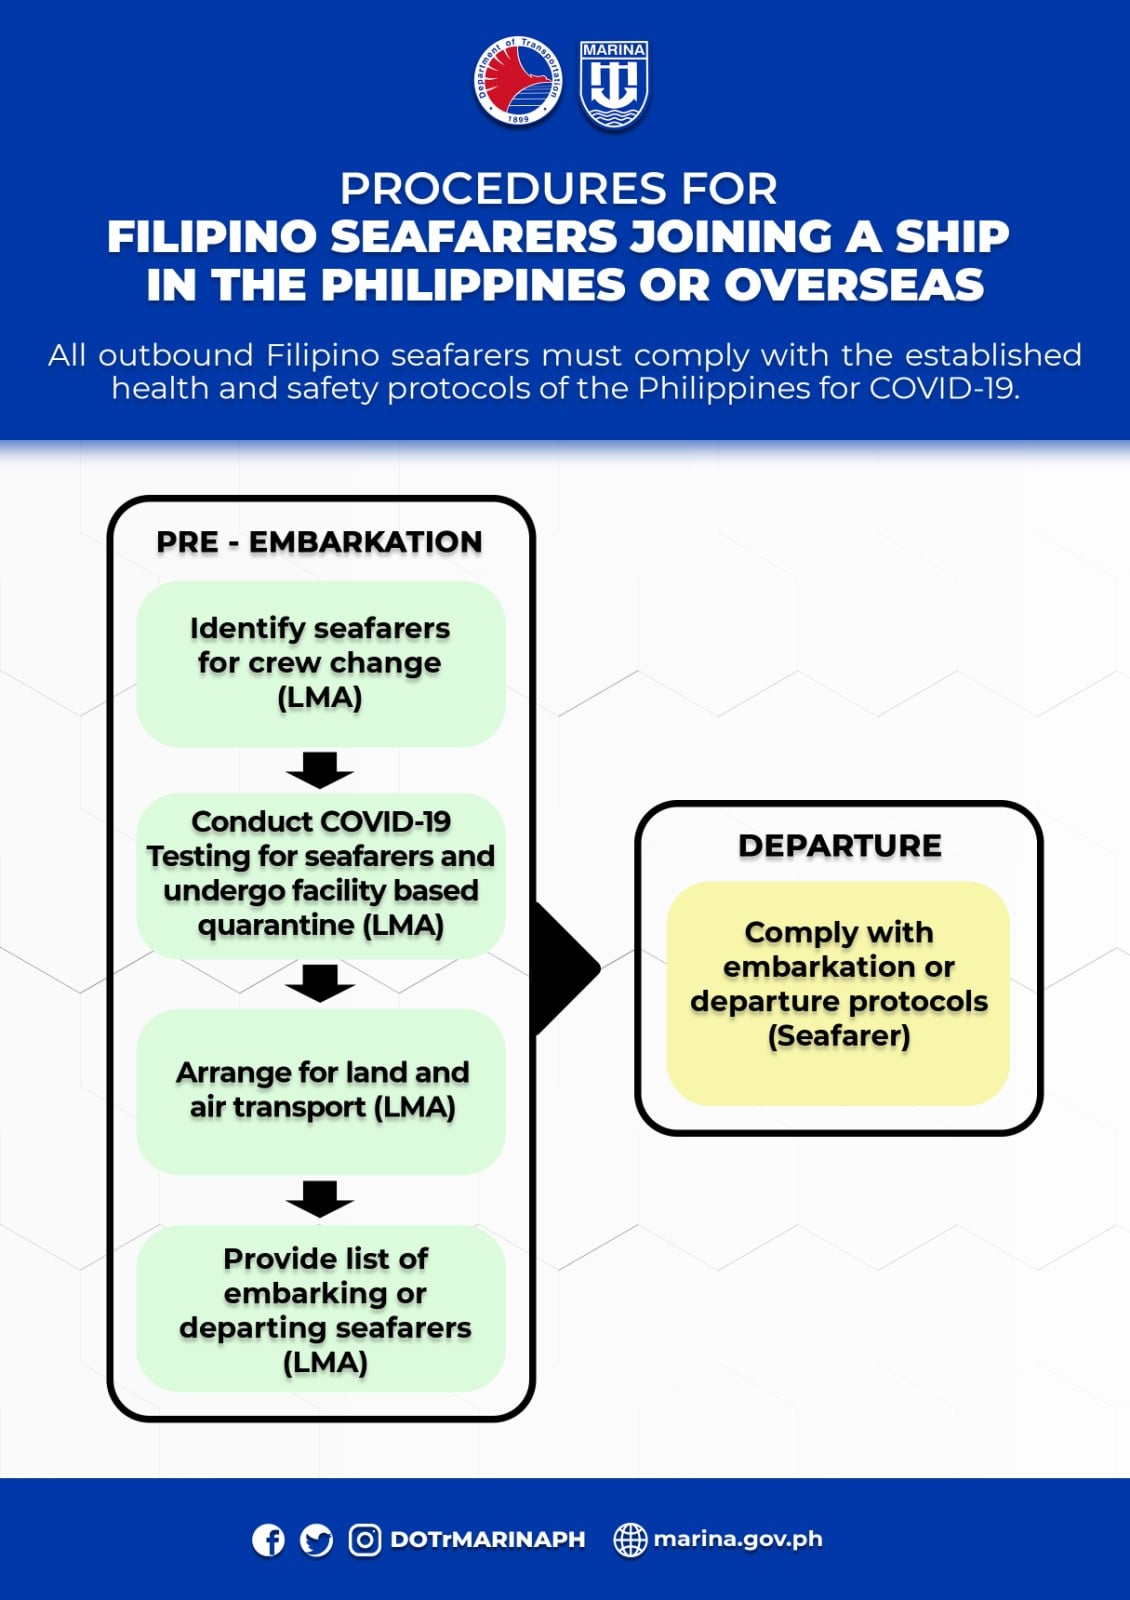 MARINA Filipino Seafarers Joining a Ship in the Philippines or Overseas